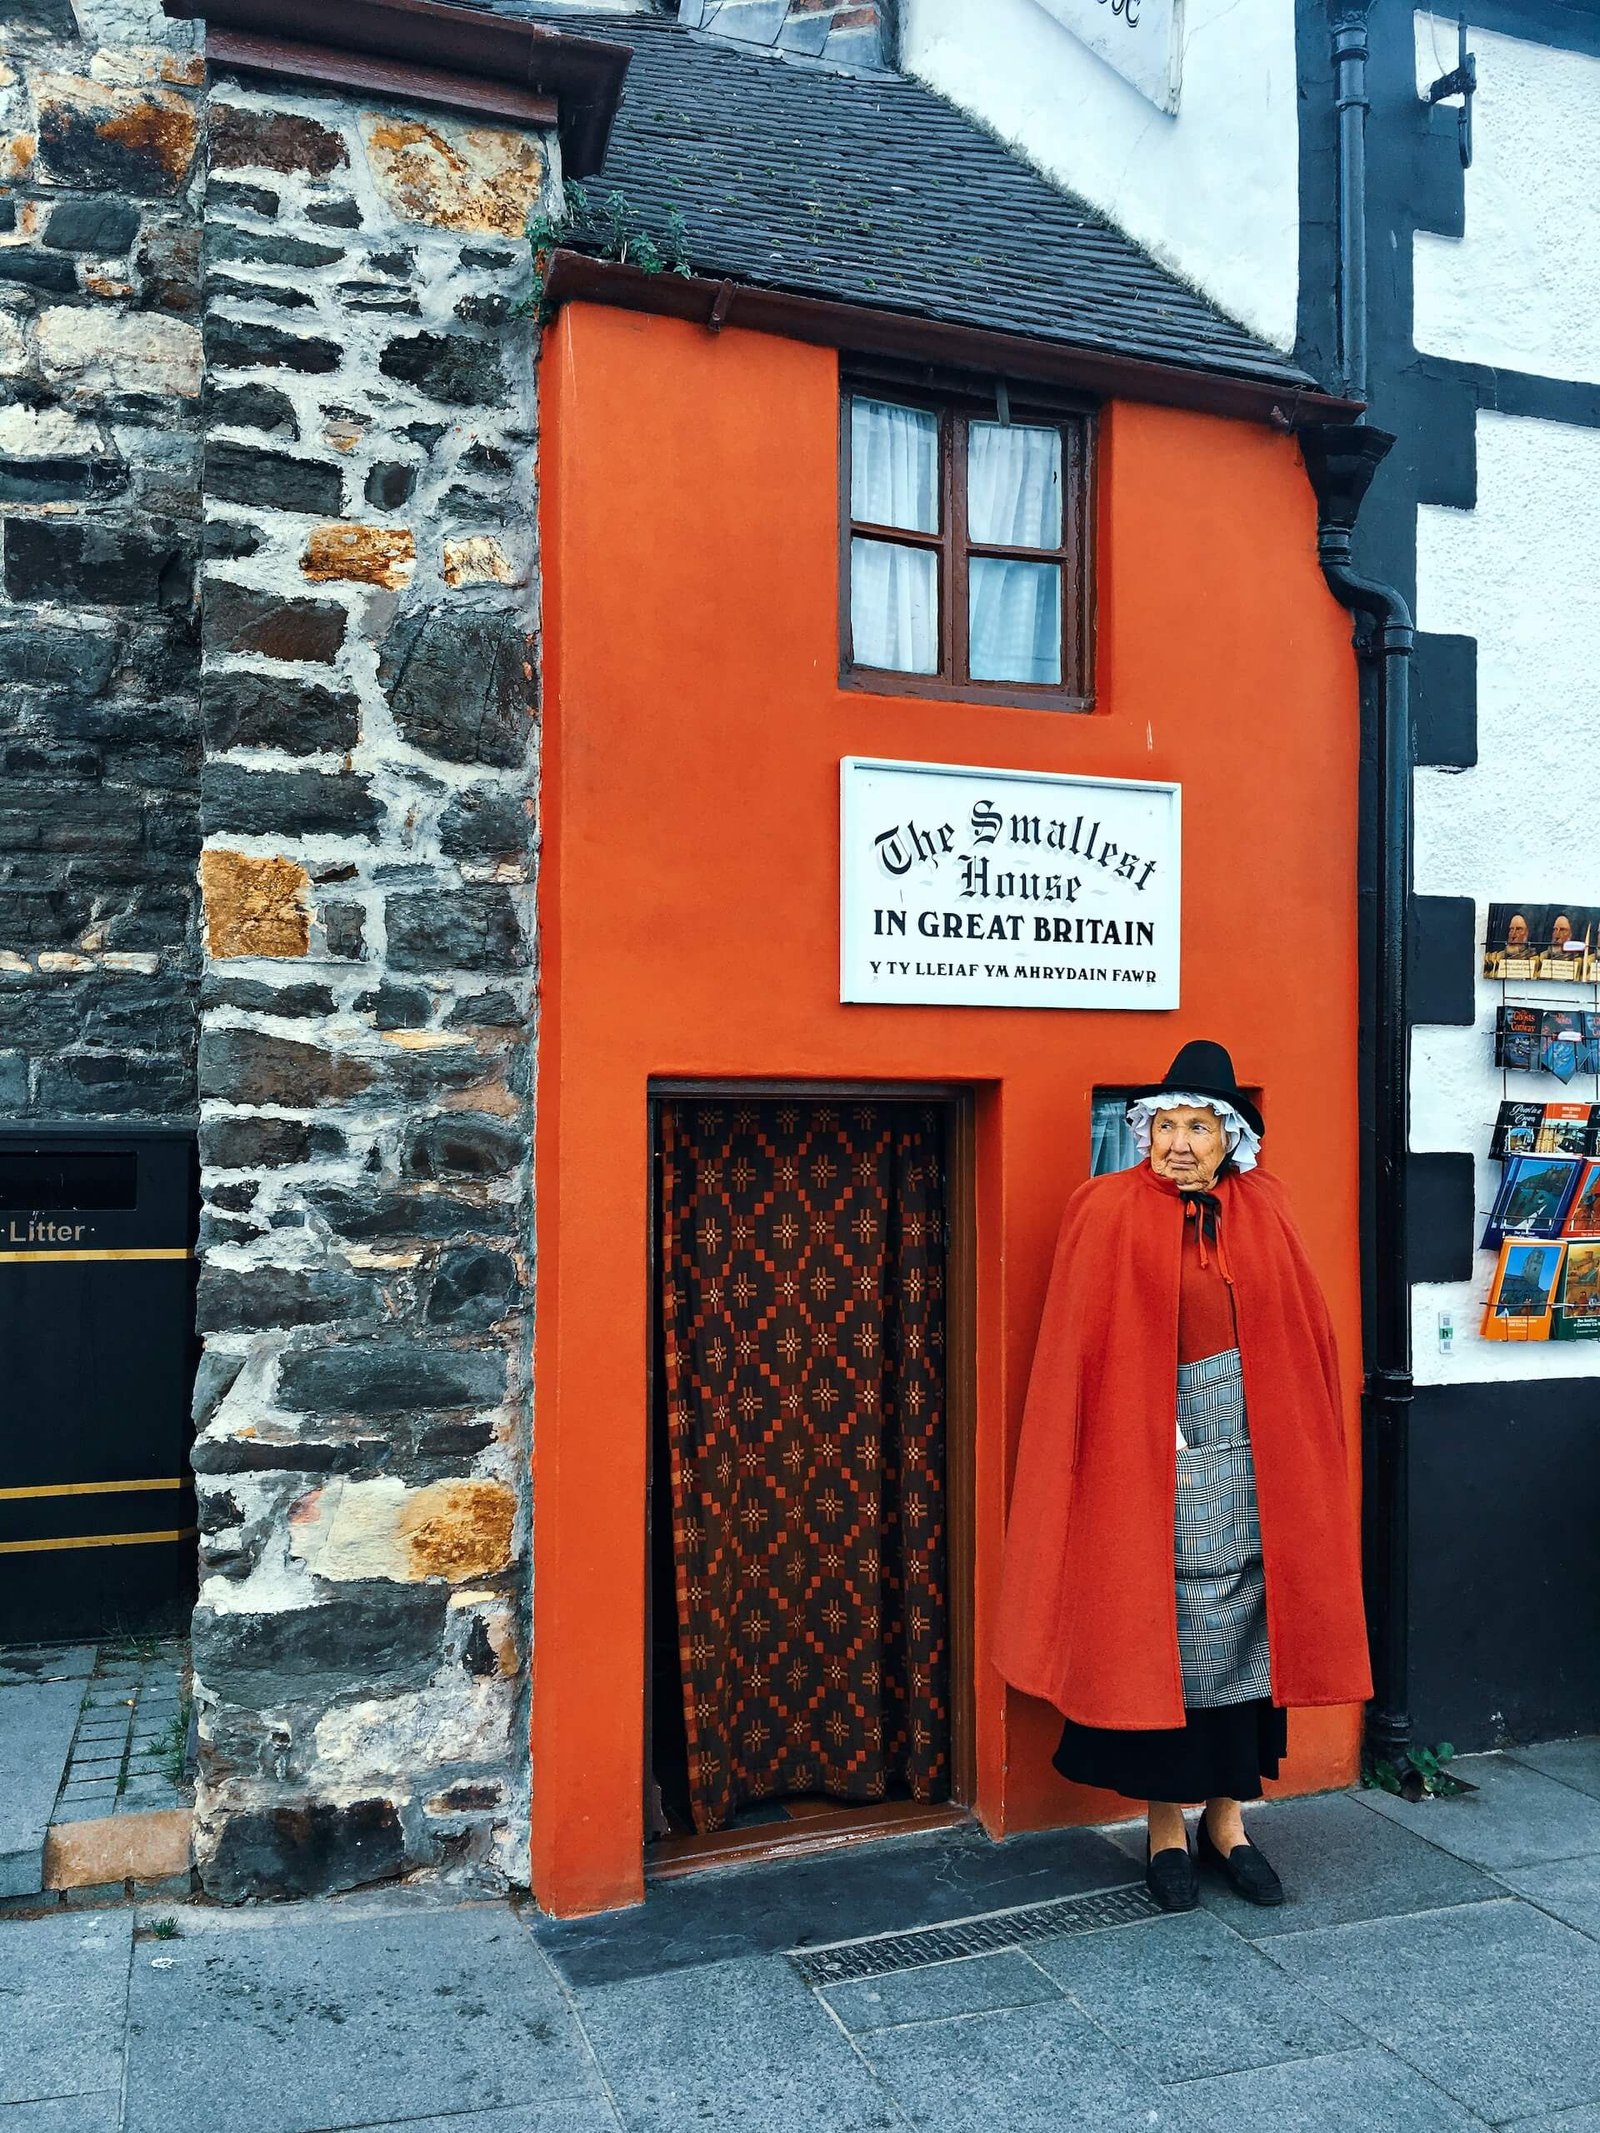 conwy smallest house in great britain